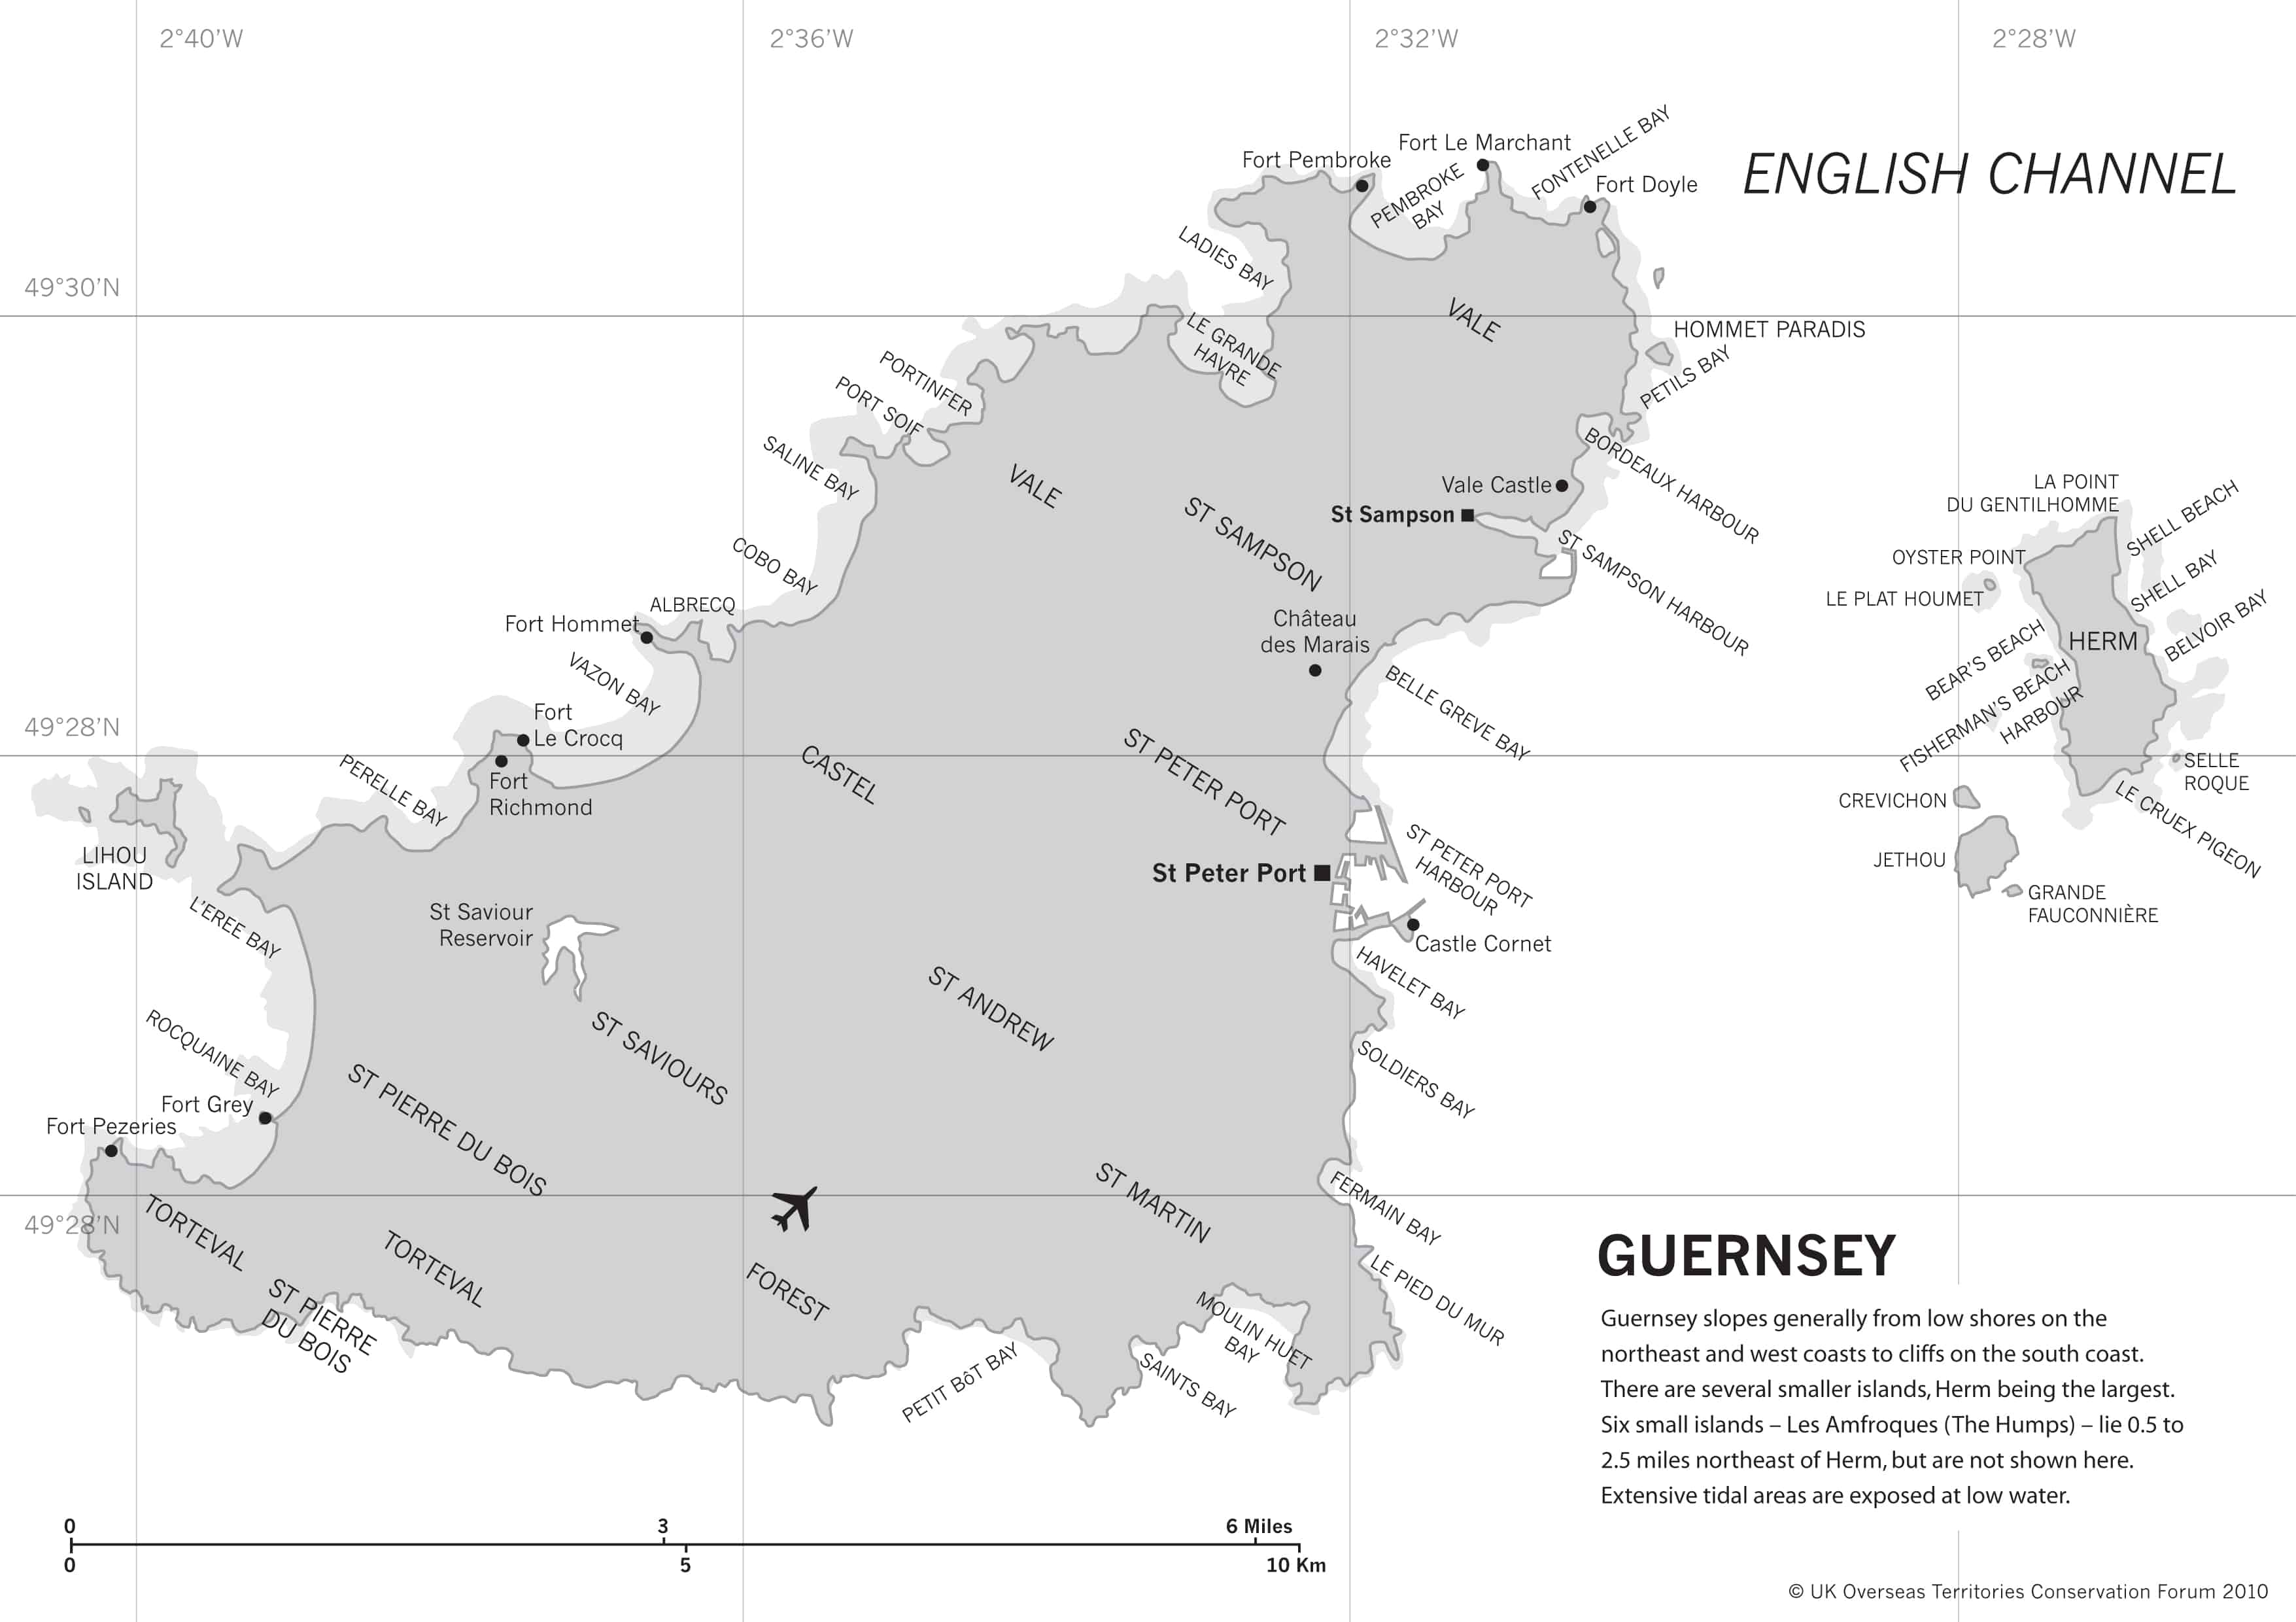 Map of Guernsey